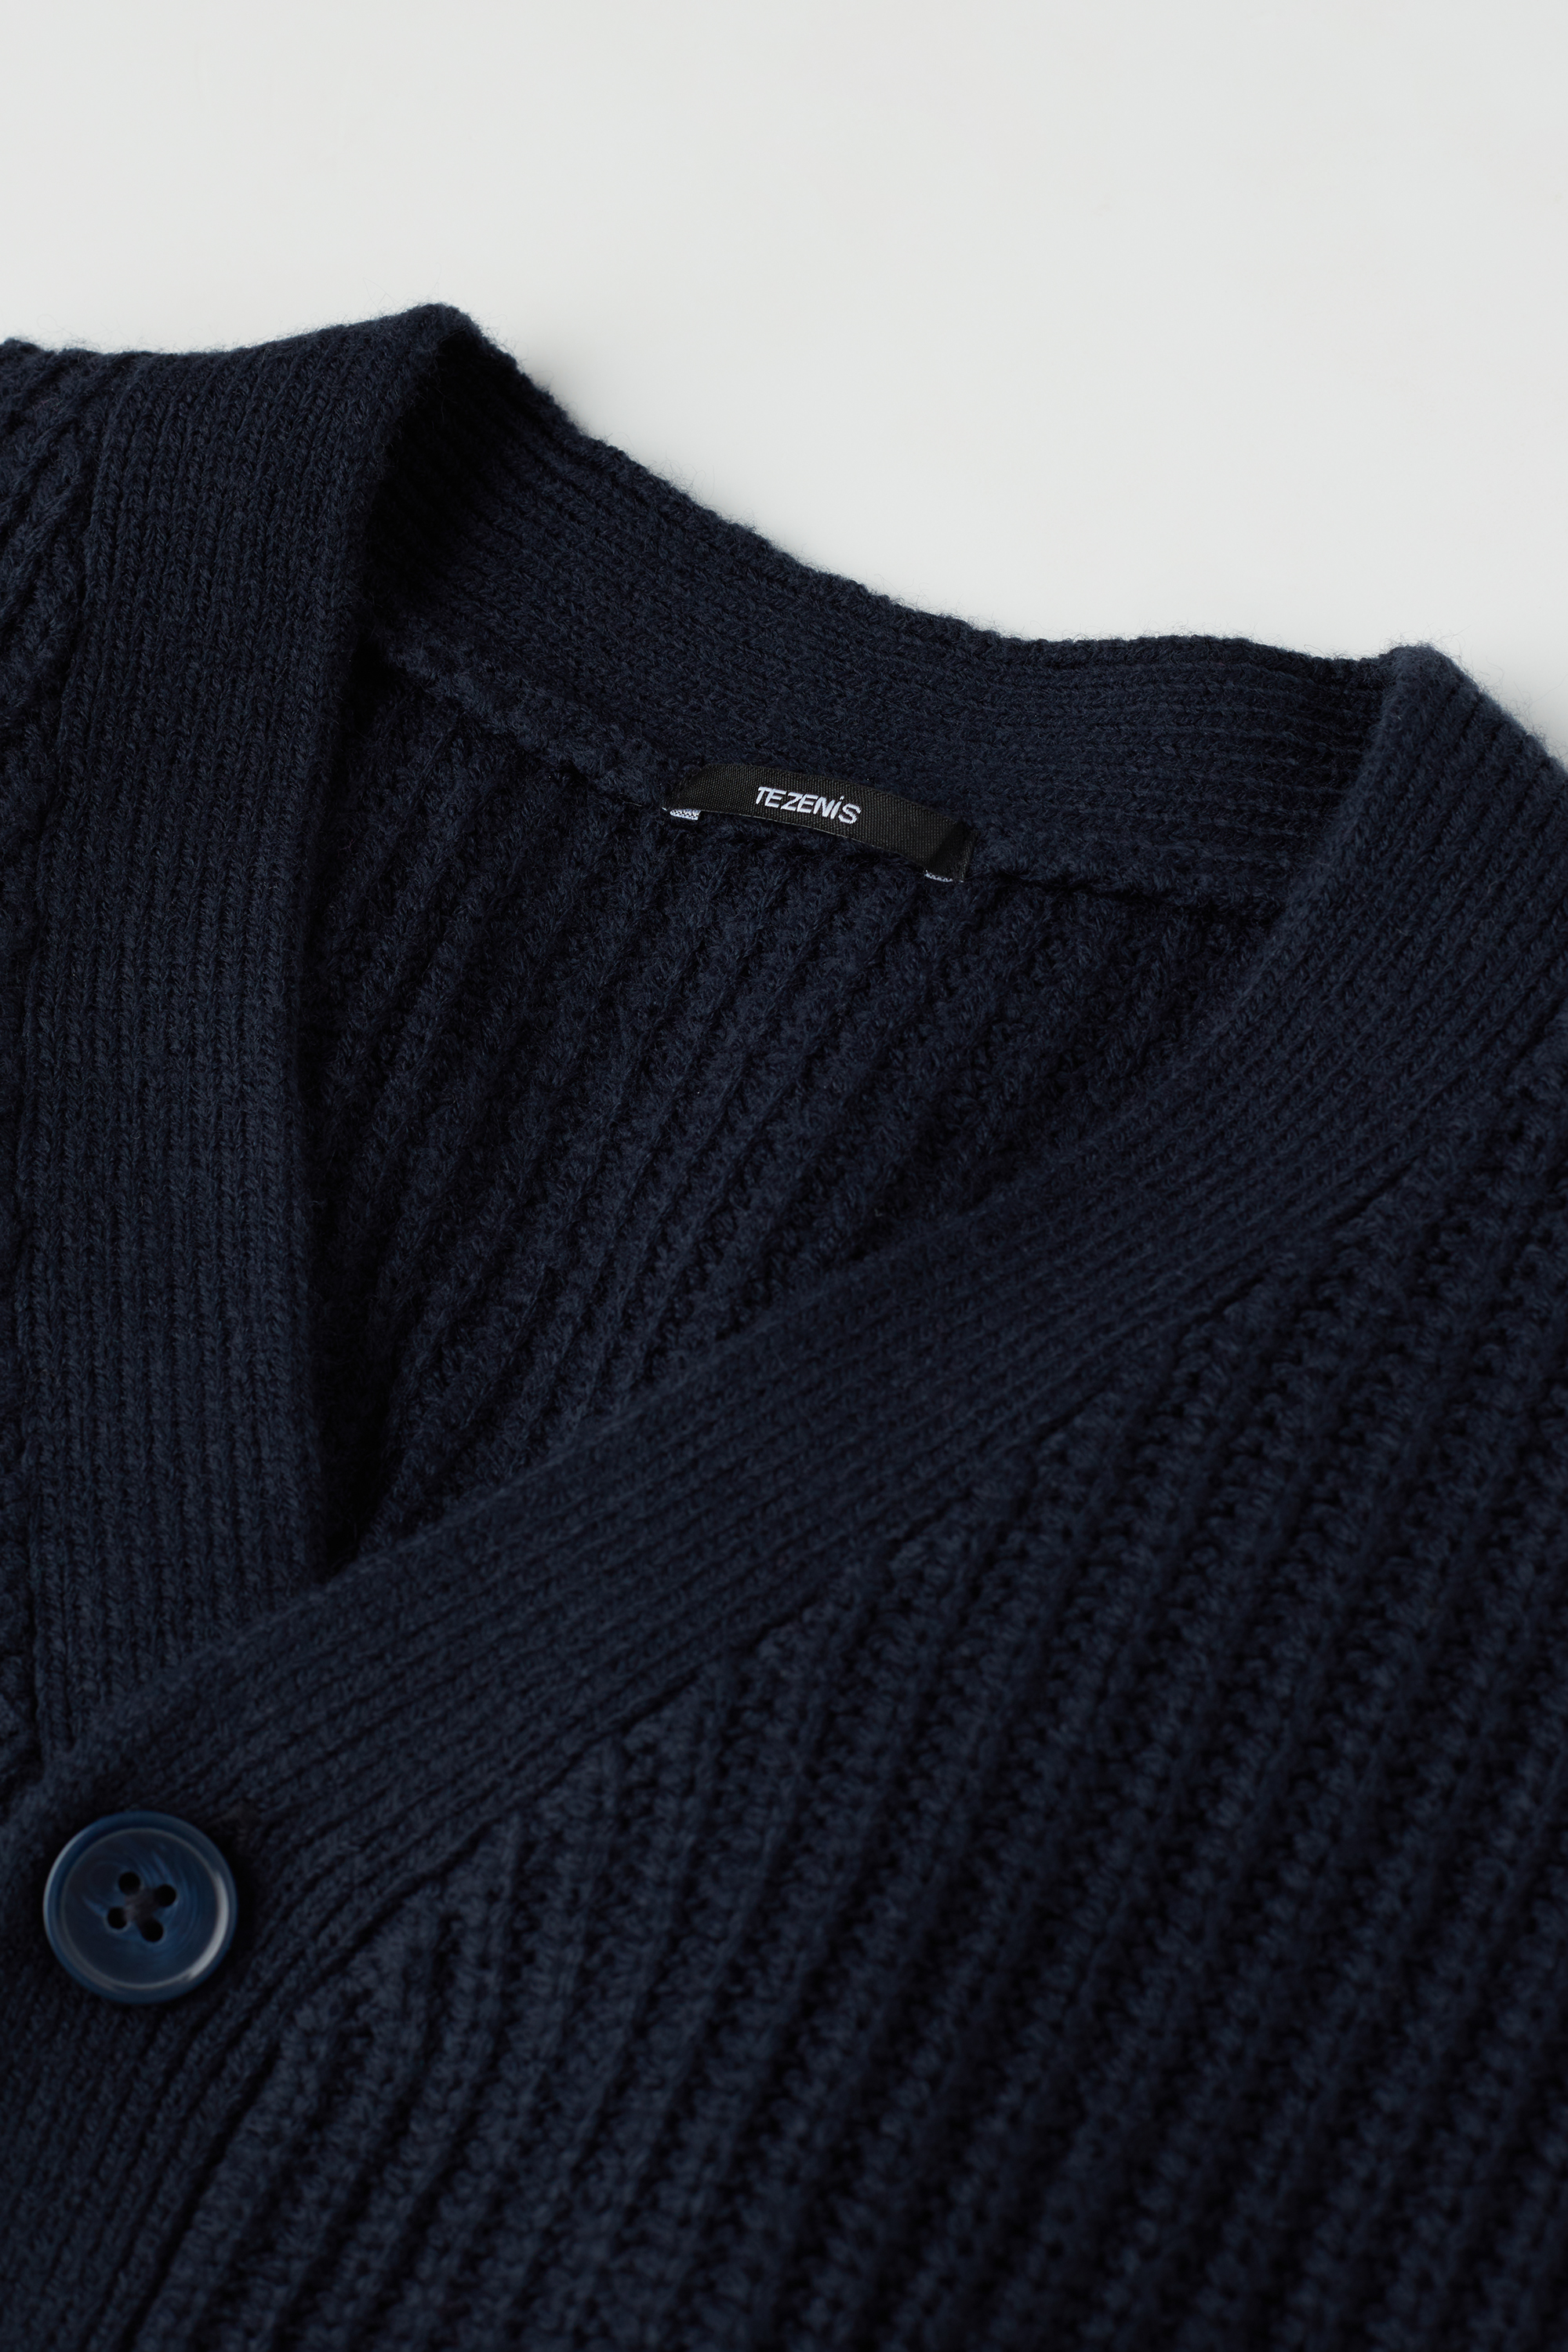 Boys’ Ribbed Long-Sleeved Cardigan with Buttons